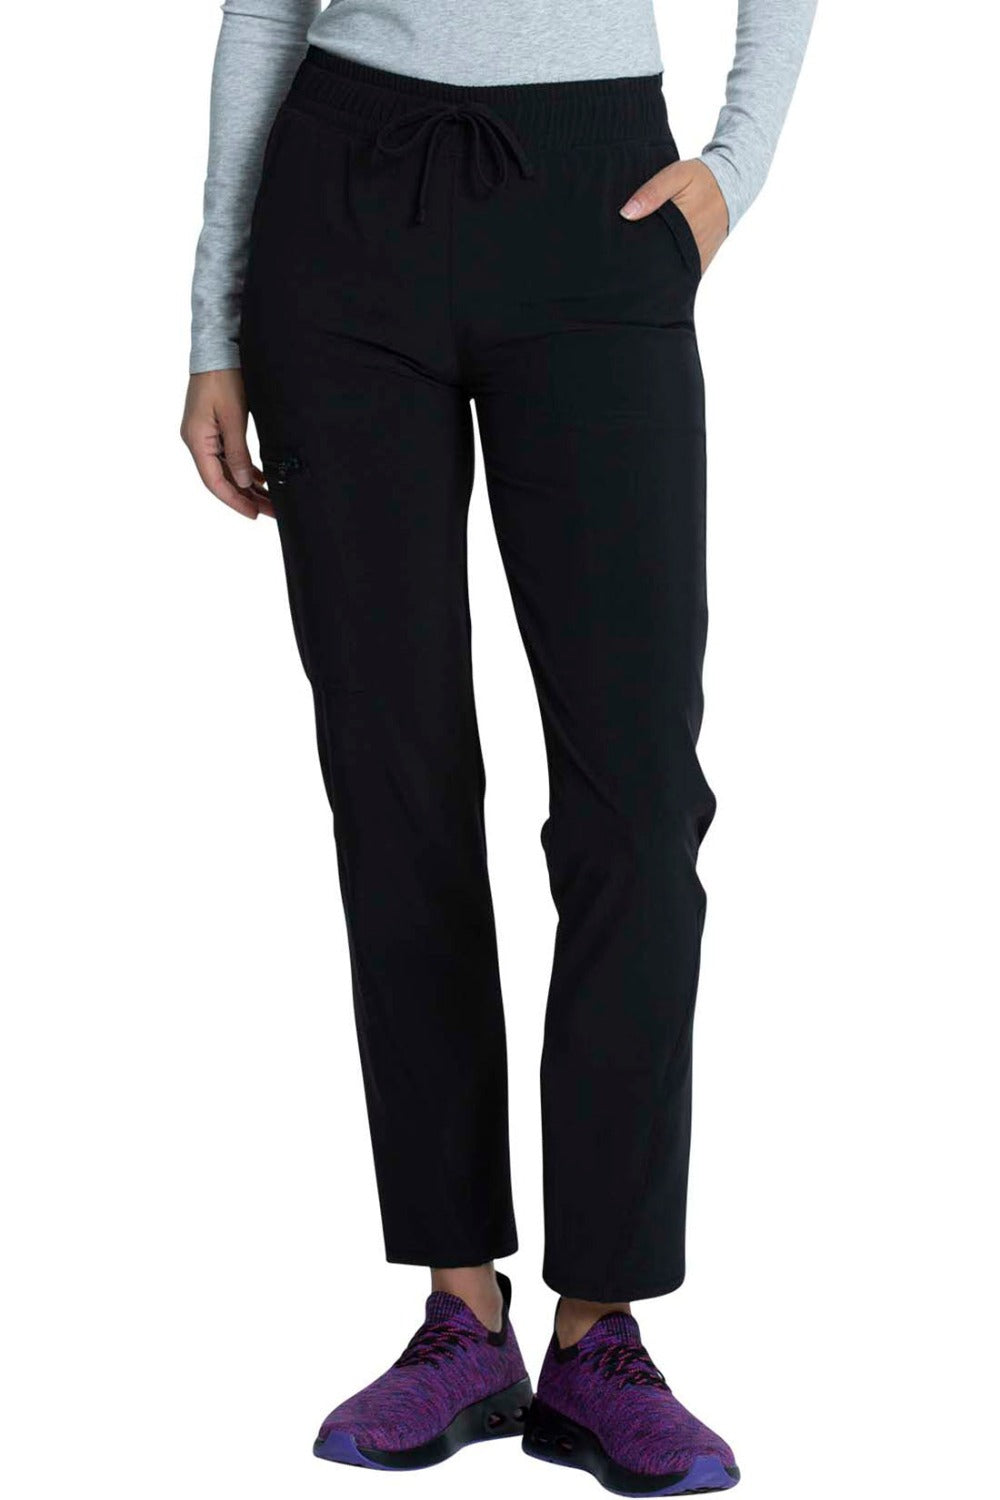 Cherokee Allura Tall Scrub Pant Mid Rise Tapered Leg Drawstring in Black at Parker's Clothing and Shoes.